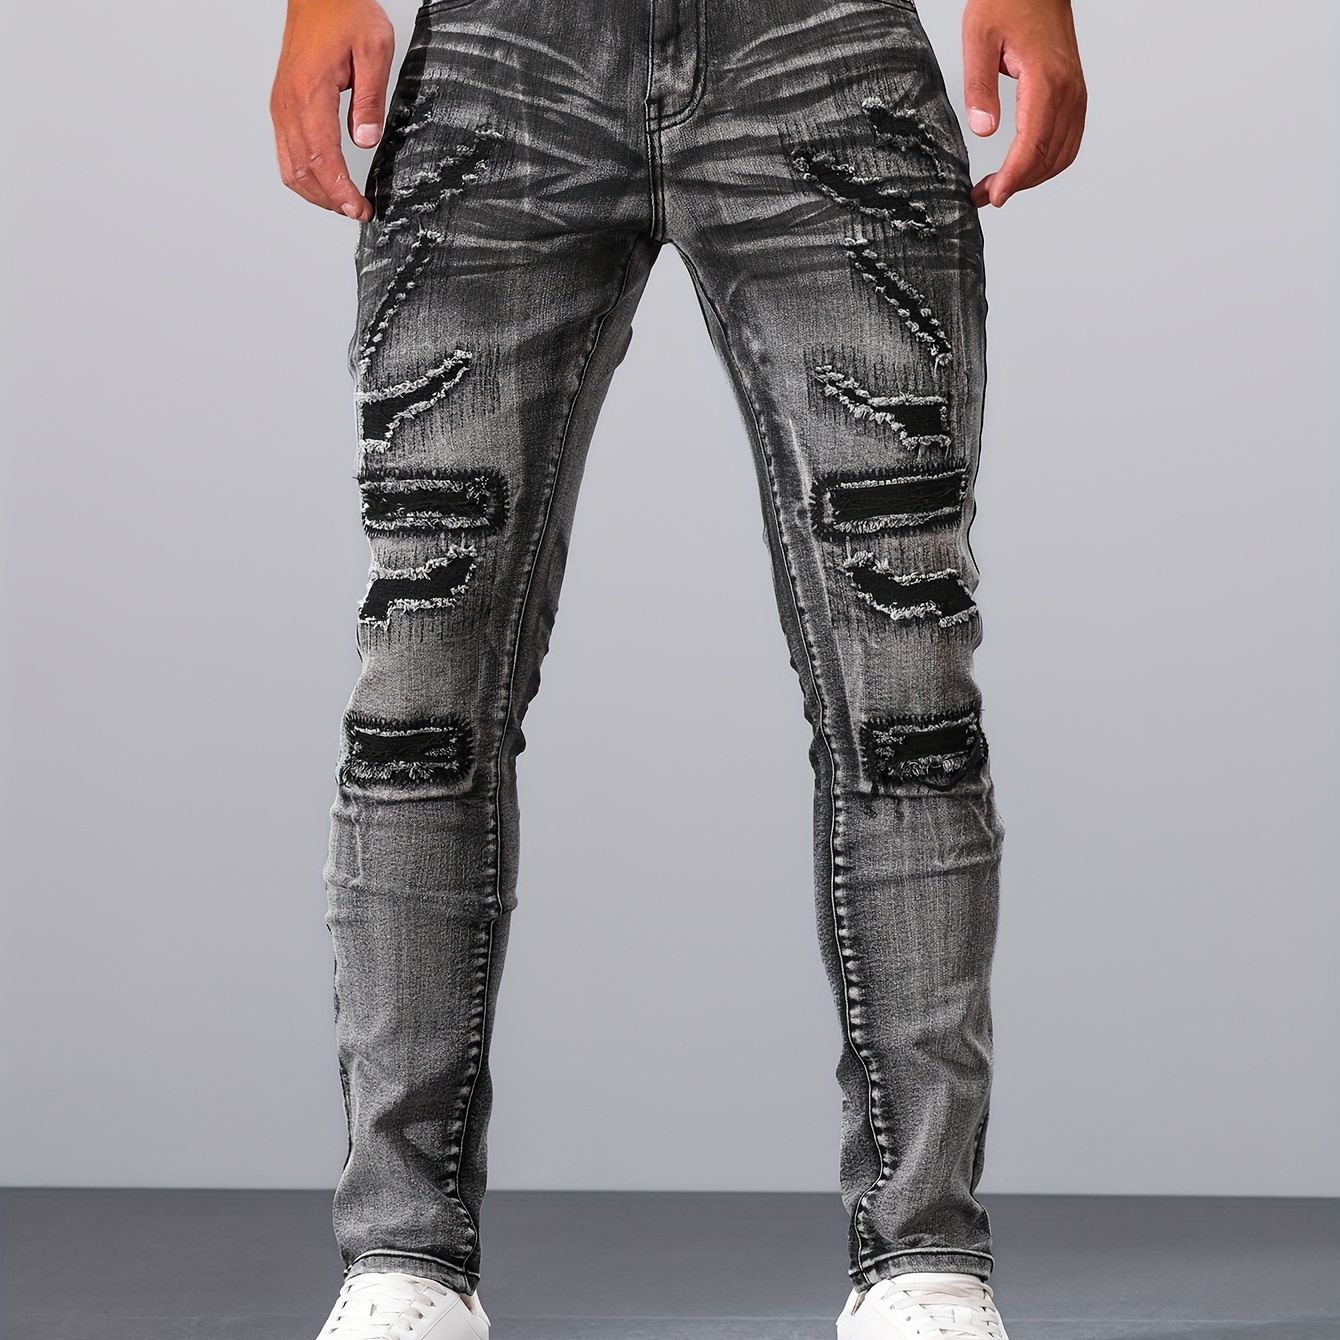 

Men's Casual Ripped Biker Jeans, Chic Street Style Skinny Jeans